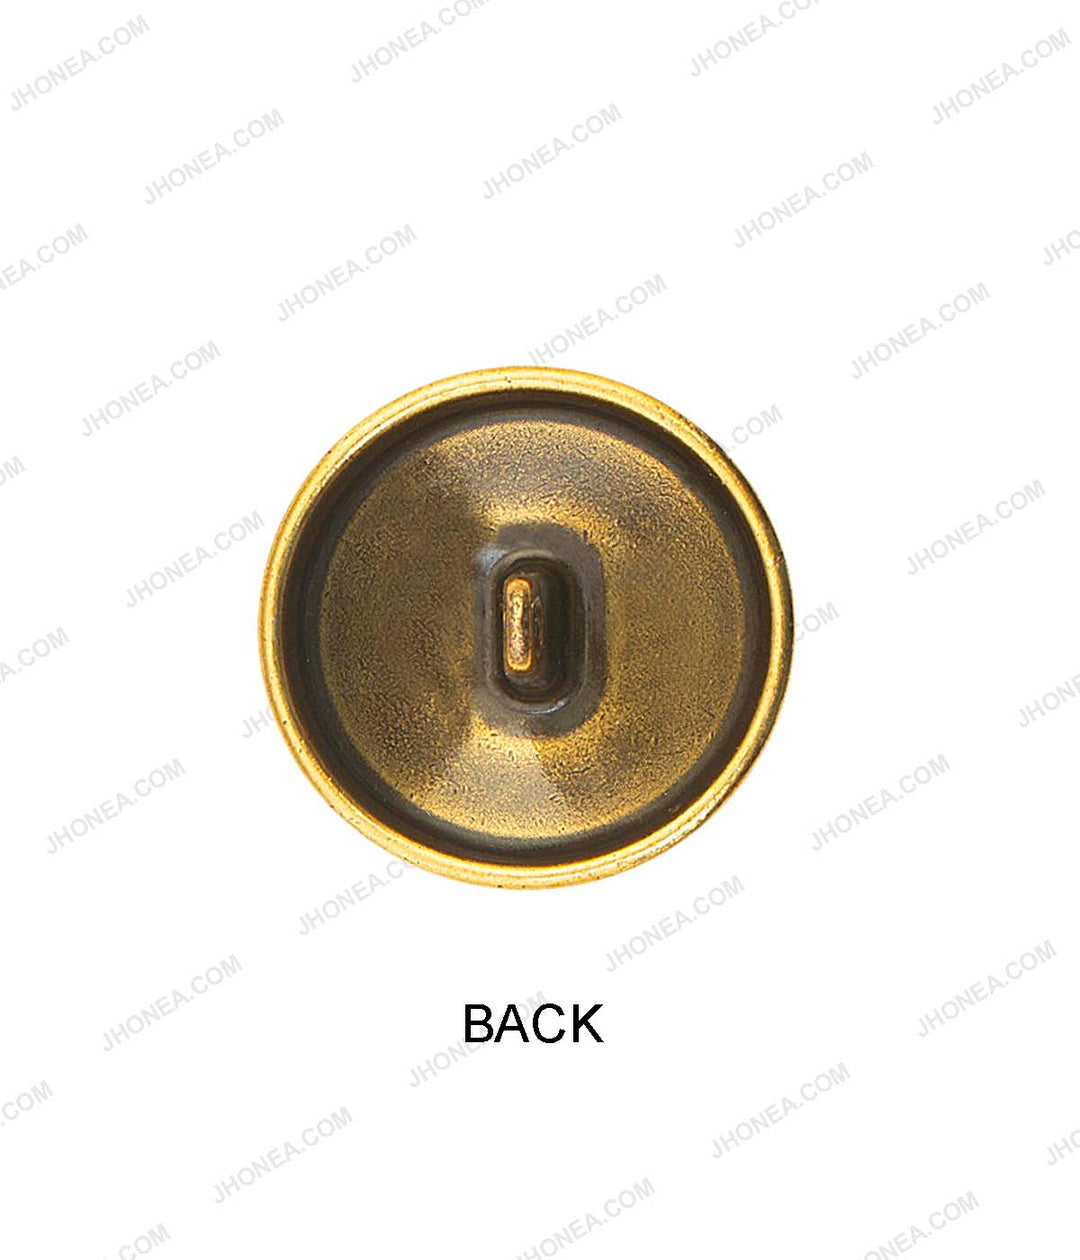 Exclusively Crafted Ancient Antique Gold Metal Buttons